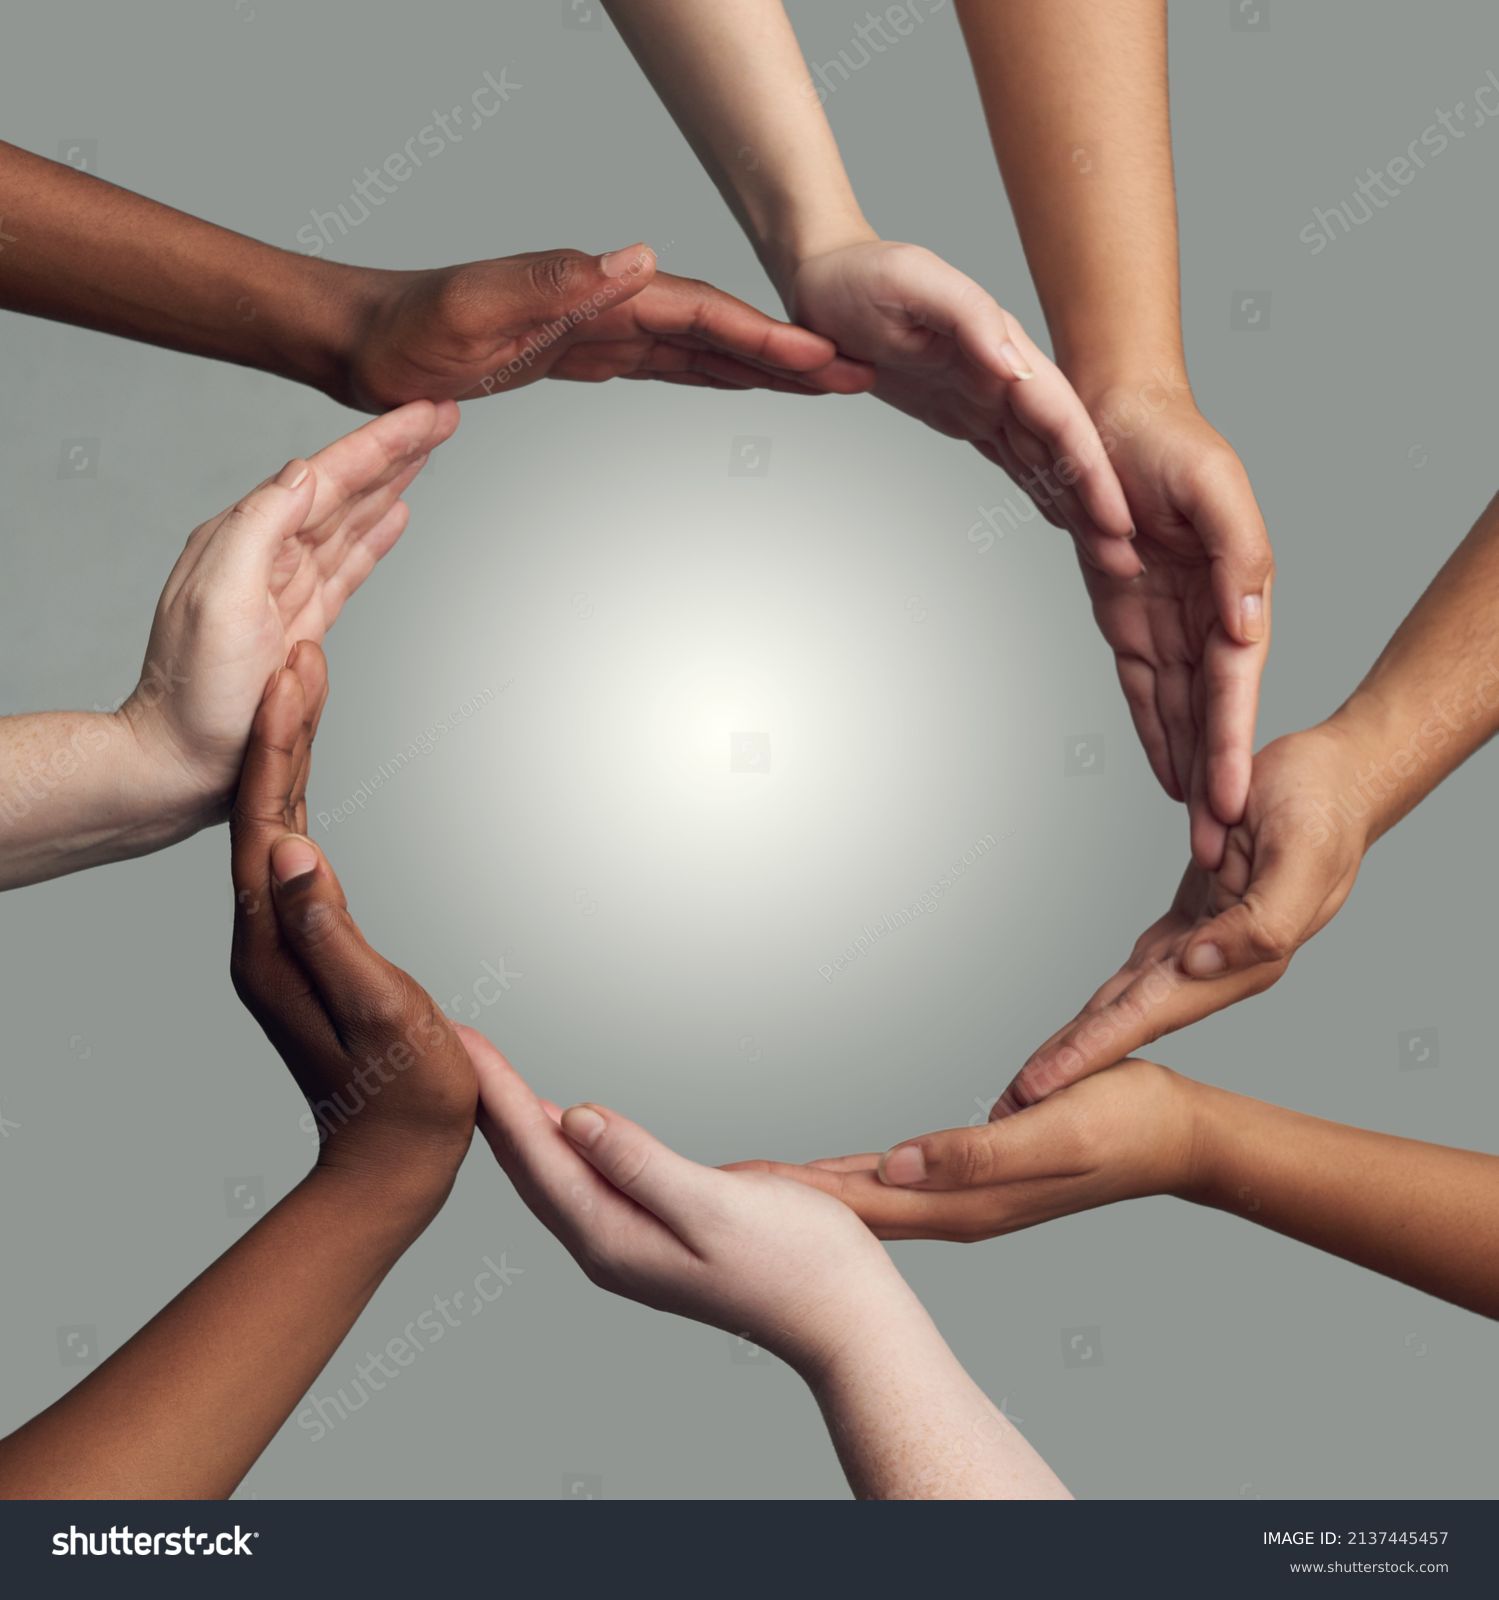 Coming together to form one. Cropped shot of a group of hands linking together to form a circle against a grey background. #2137445457